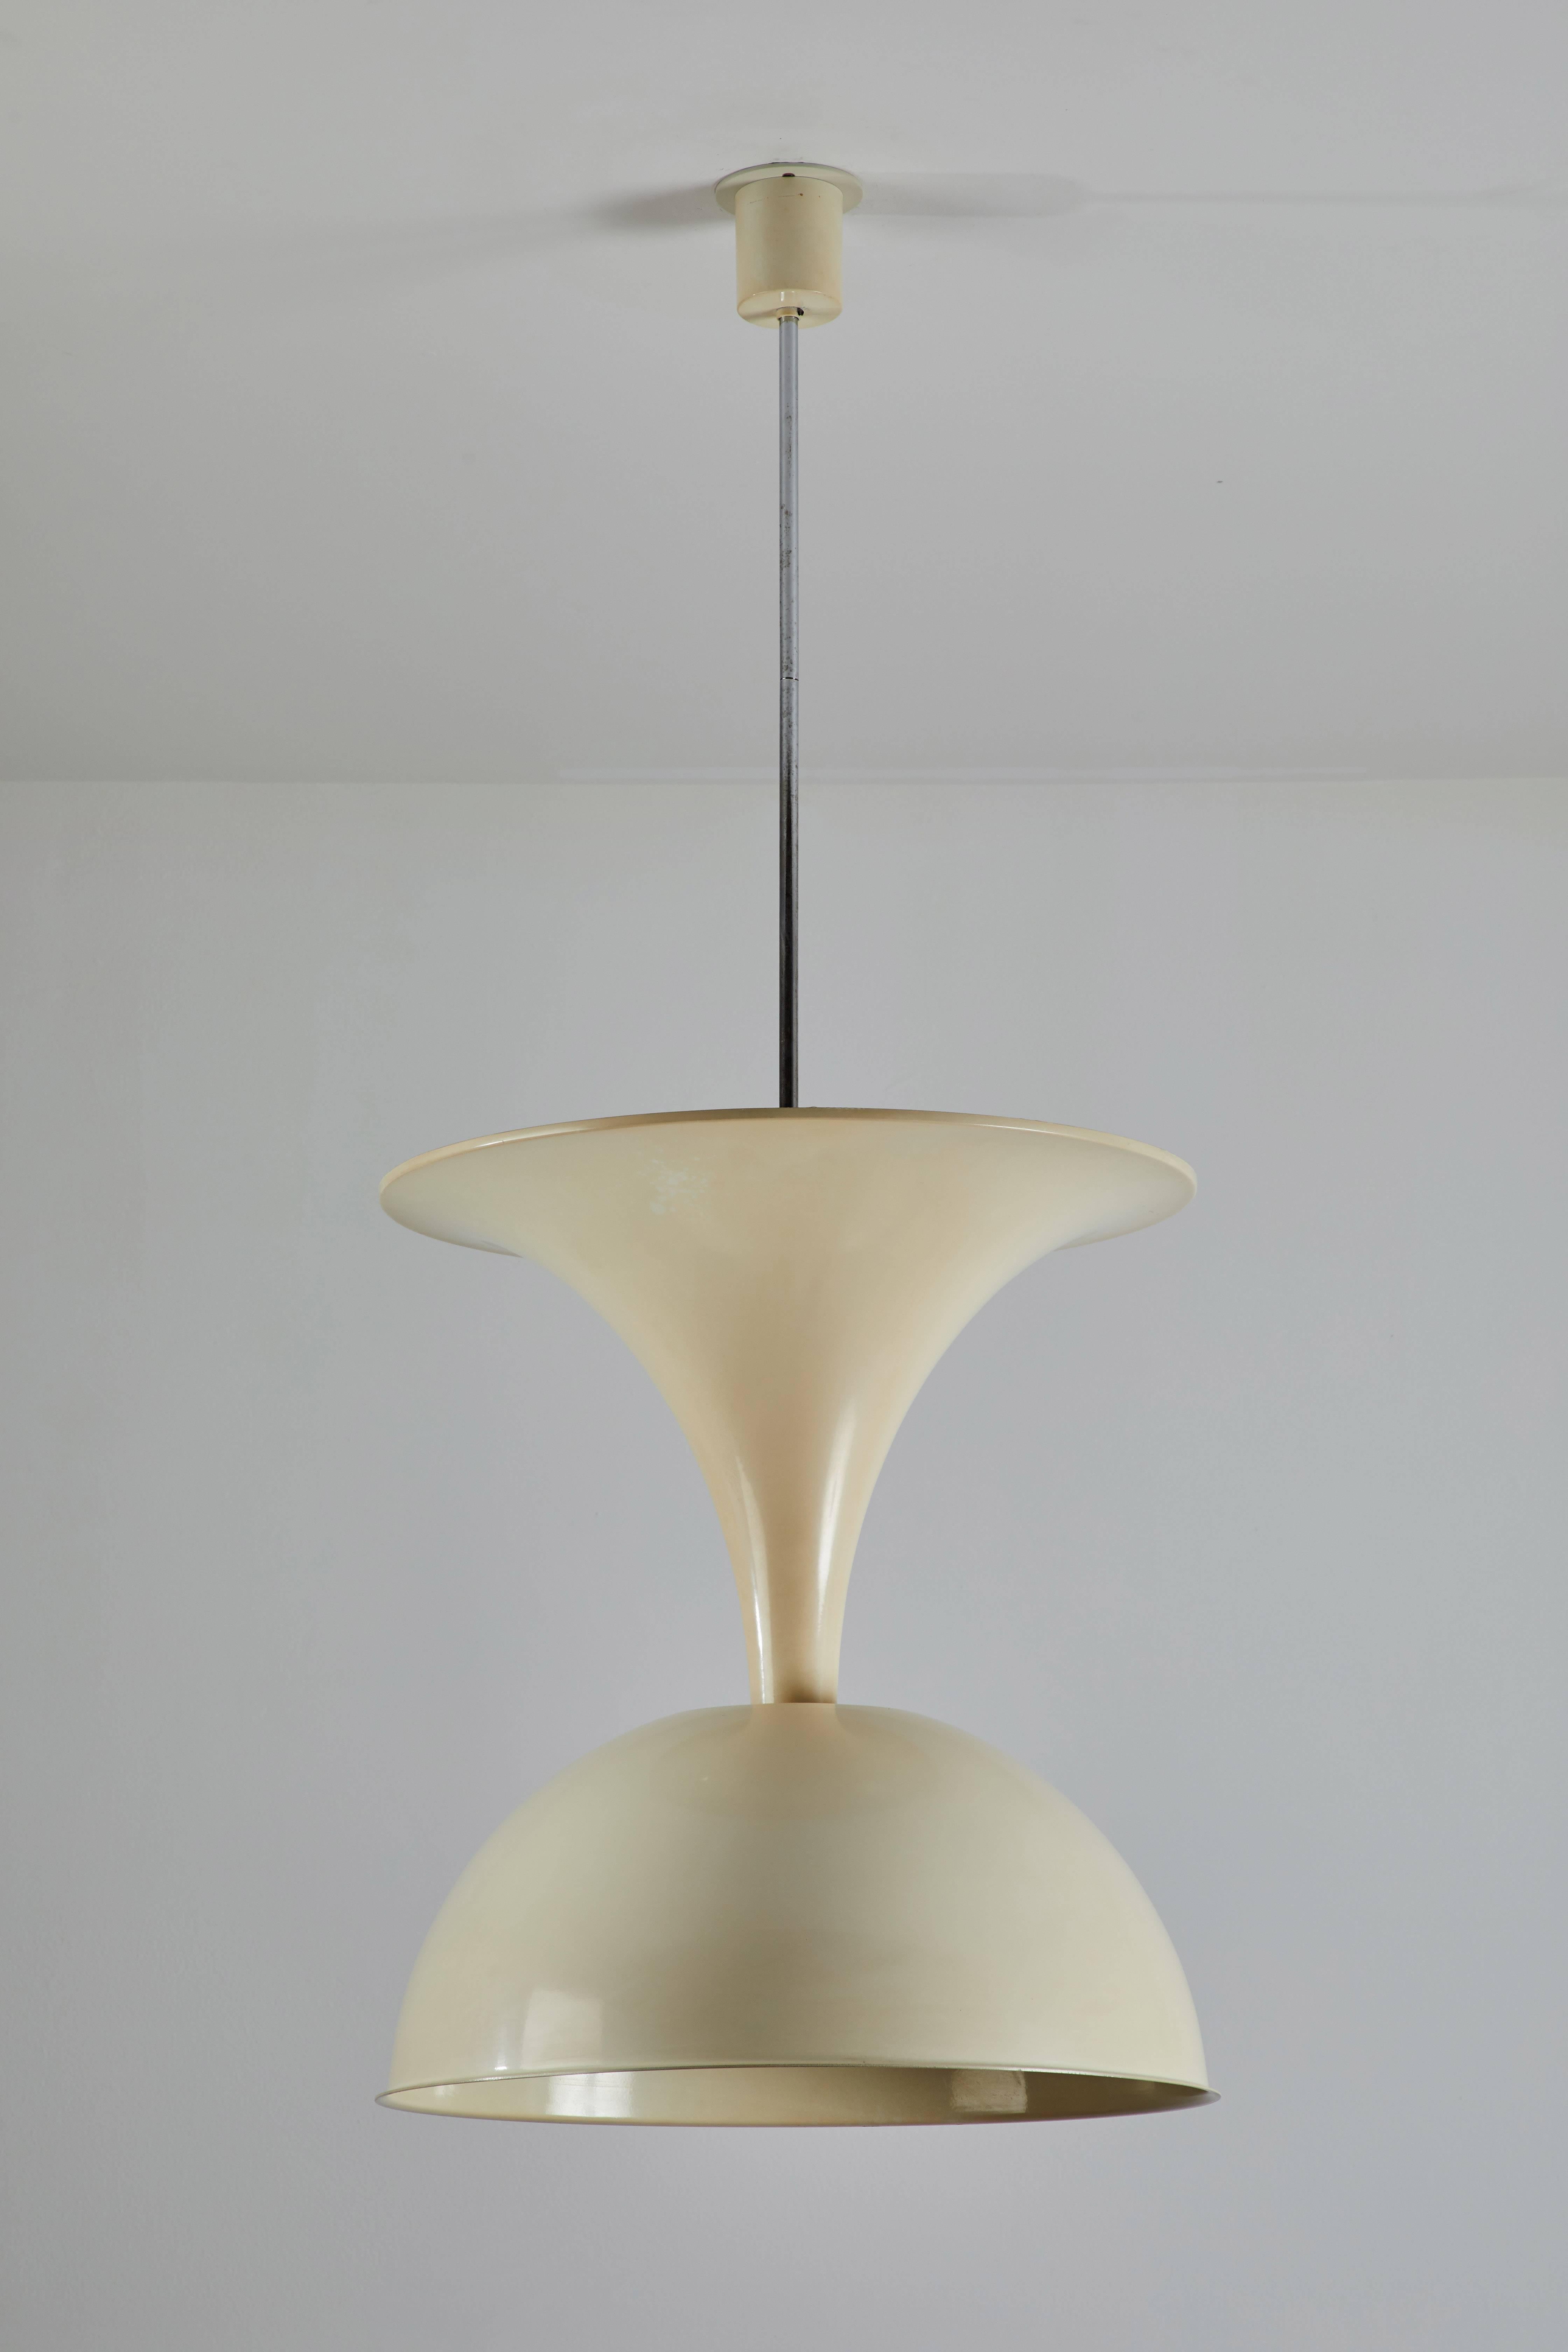 Large, double shade suspension light designed and manufactured by Valenti, in Italy, circa 1970s. Original enameled metal and brass stem. Wired for US junction boxes. Provides uplight and downlight. Takes three E14 40w maximum bulbs in top shade and